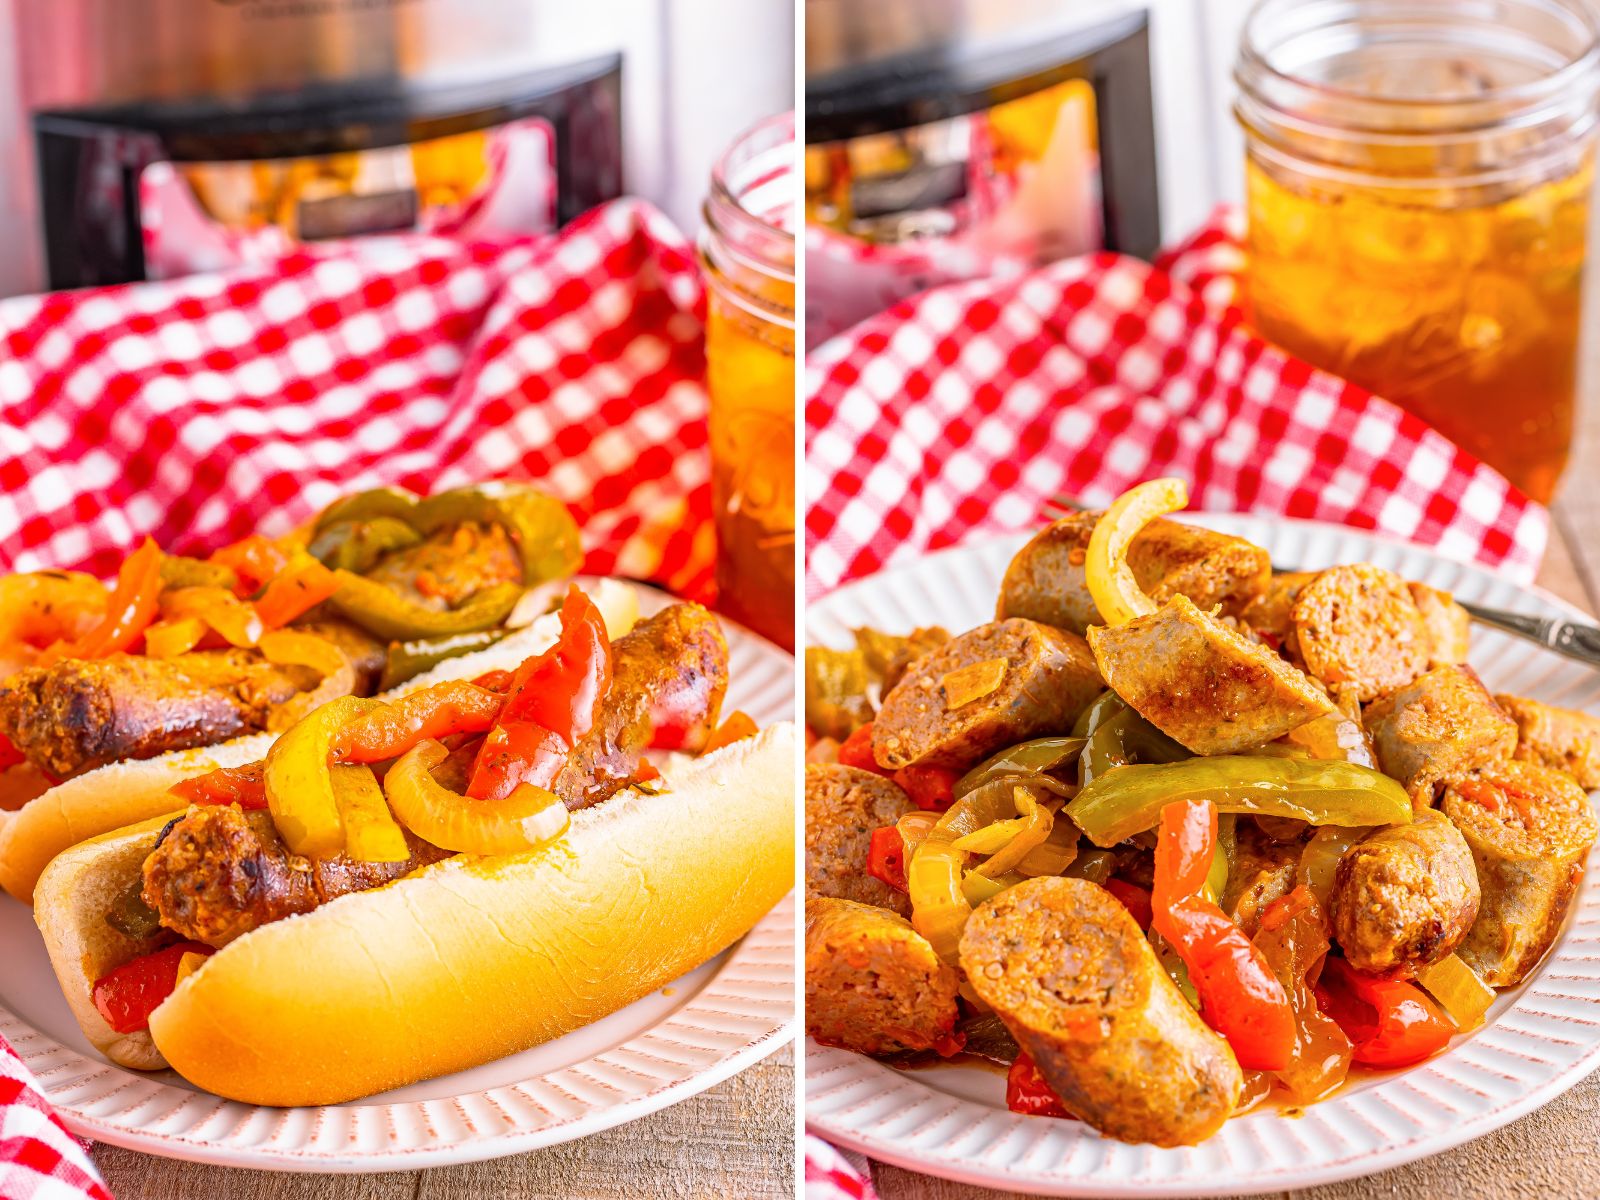 Sausage and Peppers on a hot dog bun and a plate of Crock Pot Sausage and Peppers.